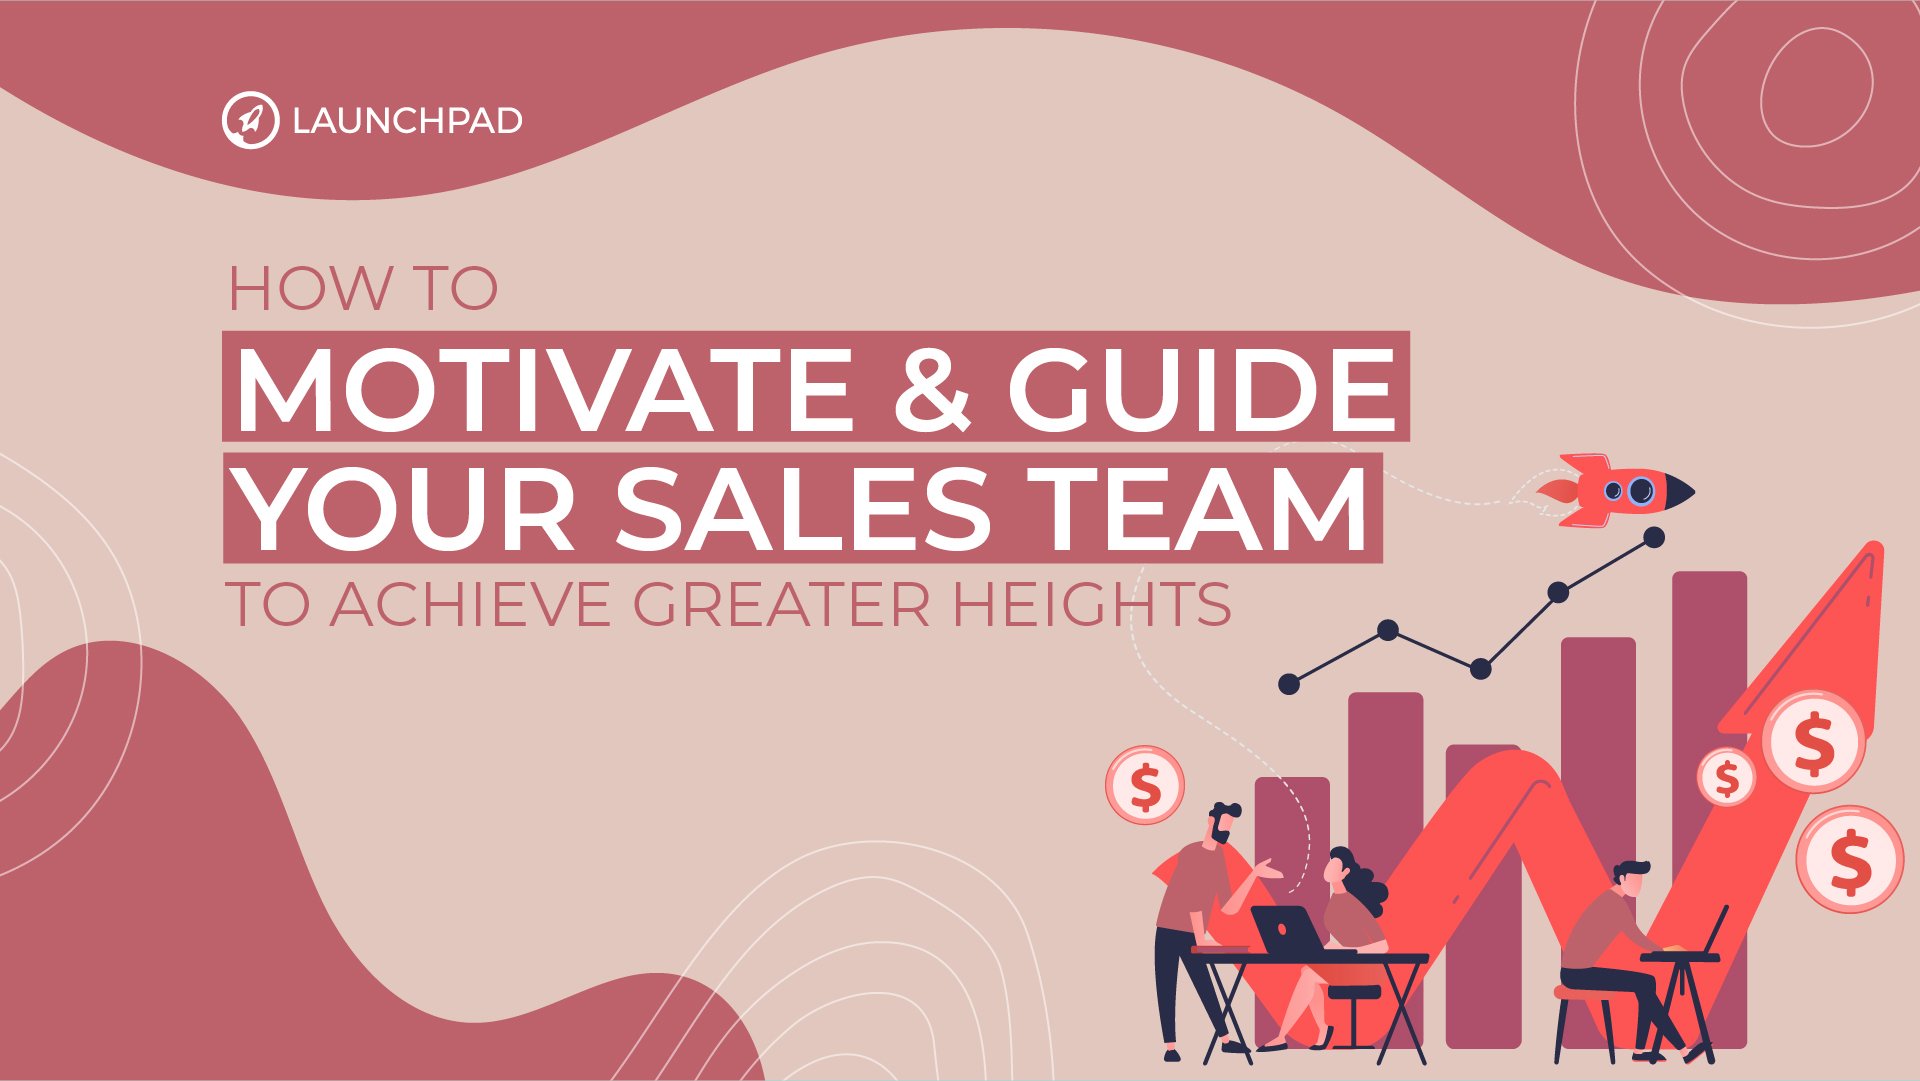 How to Manage & Guide Sales Team-Launchpad